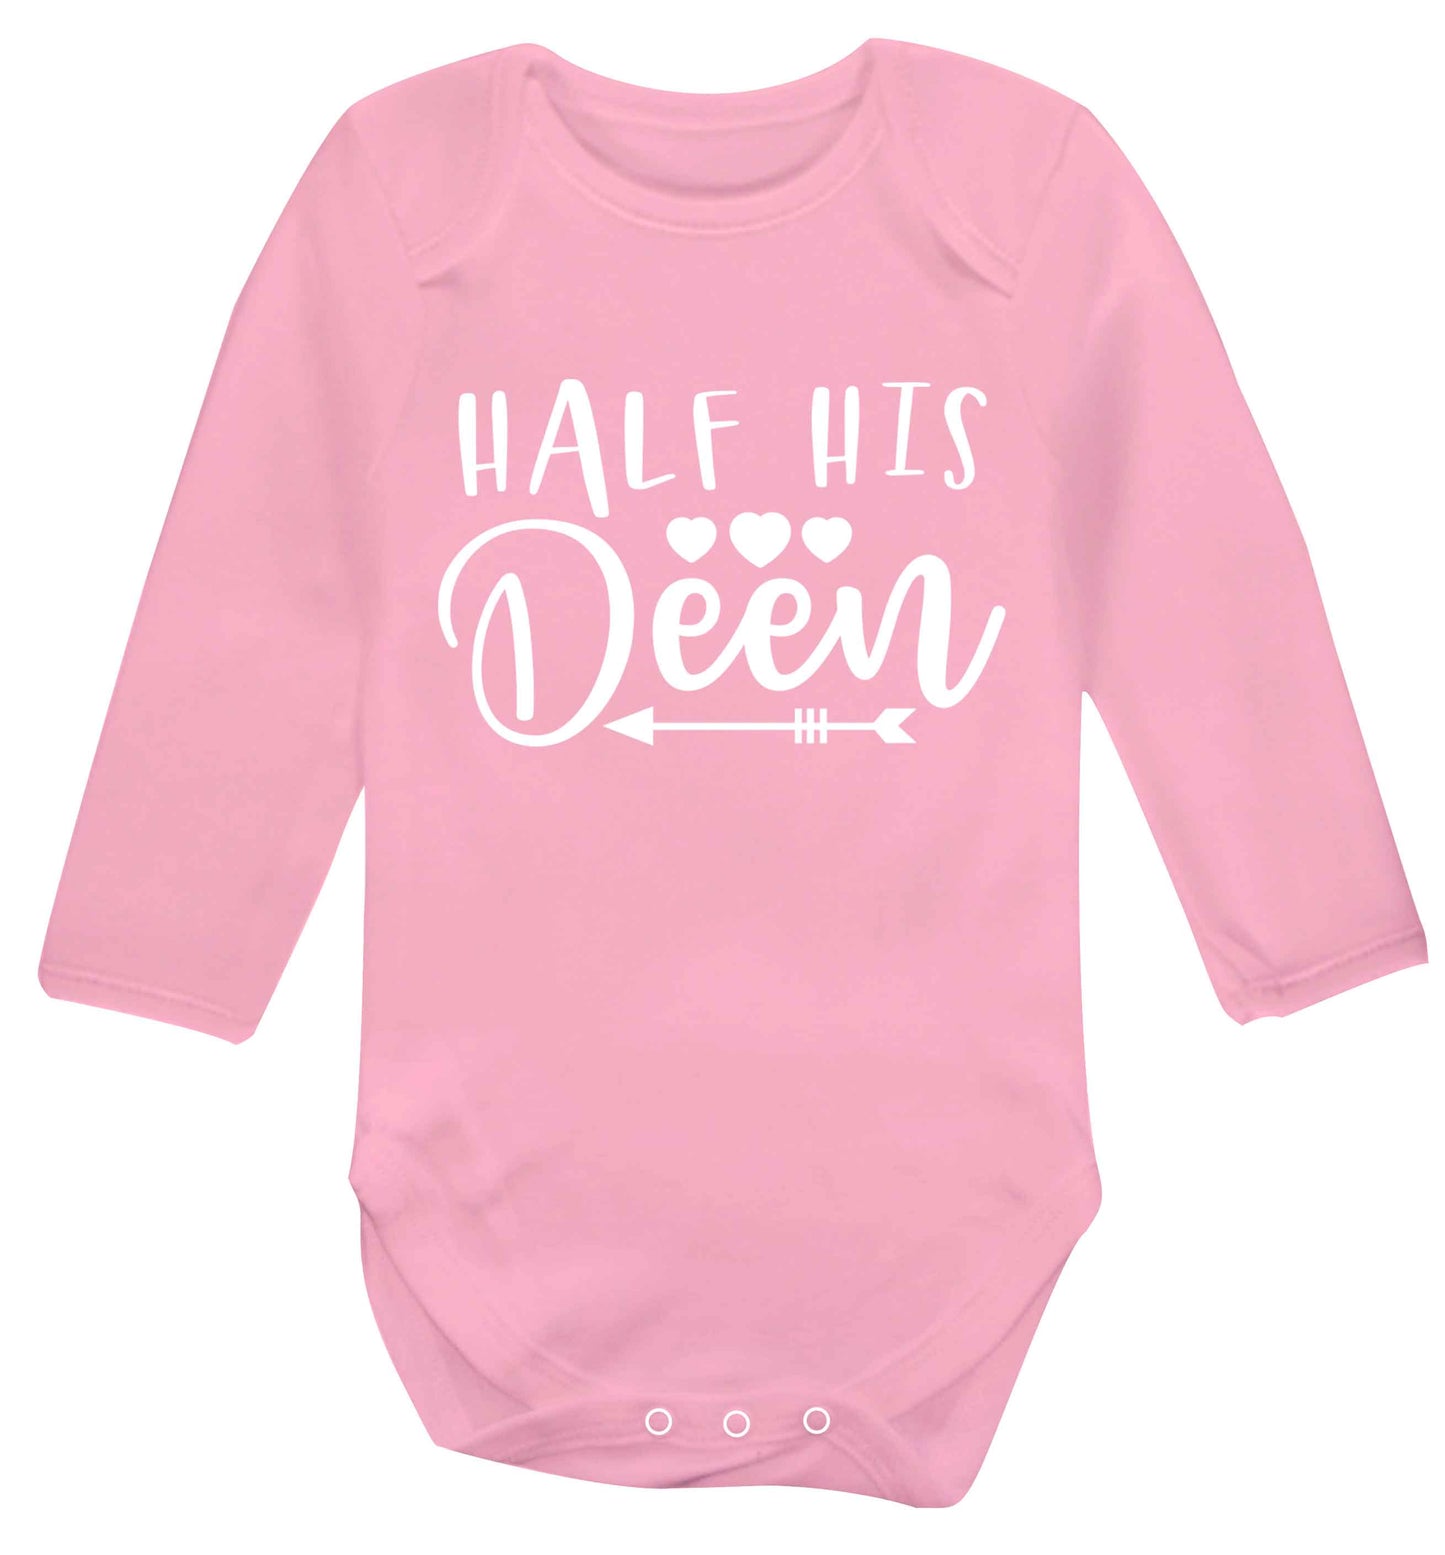 Half his deen Baby Vest long sleeved pale pink 6-12 months